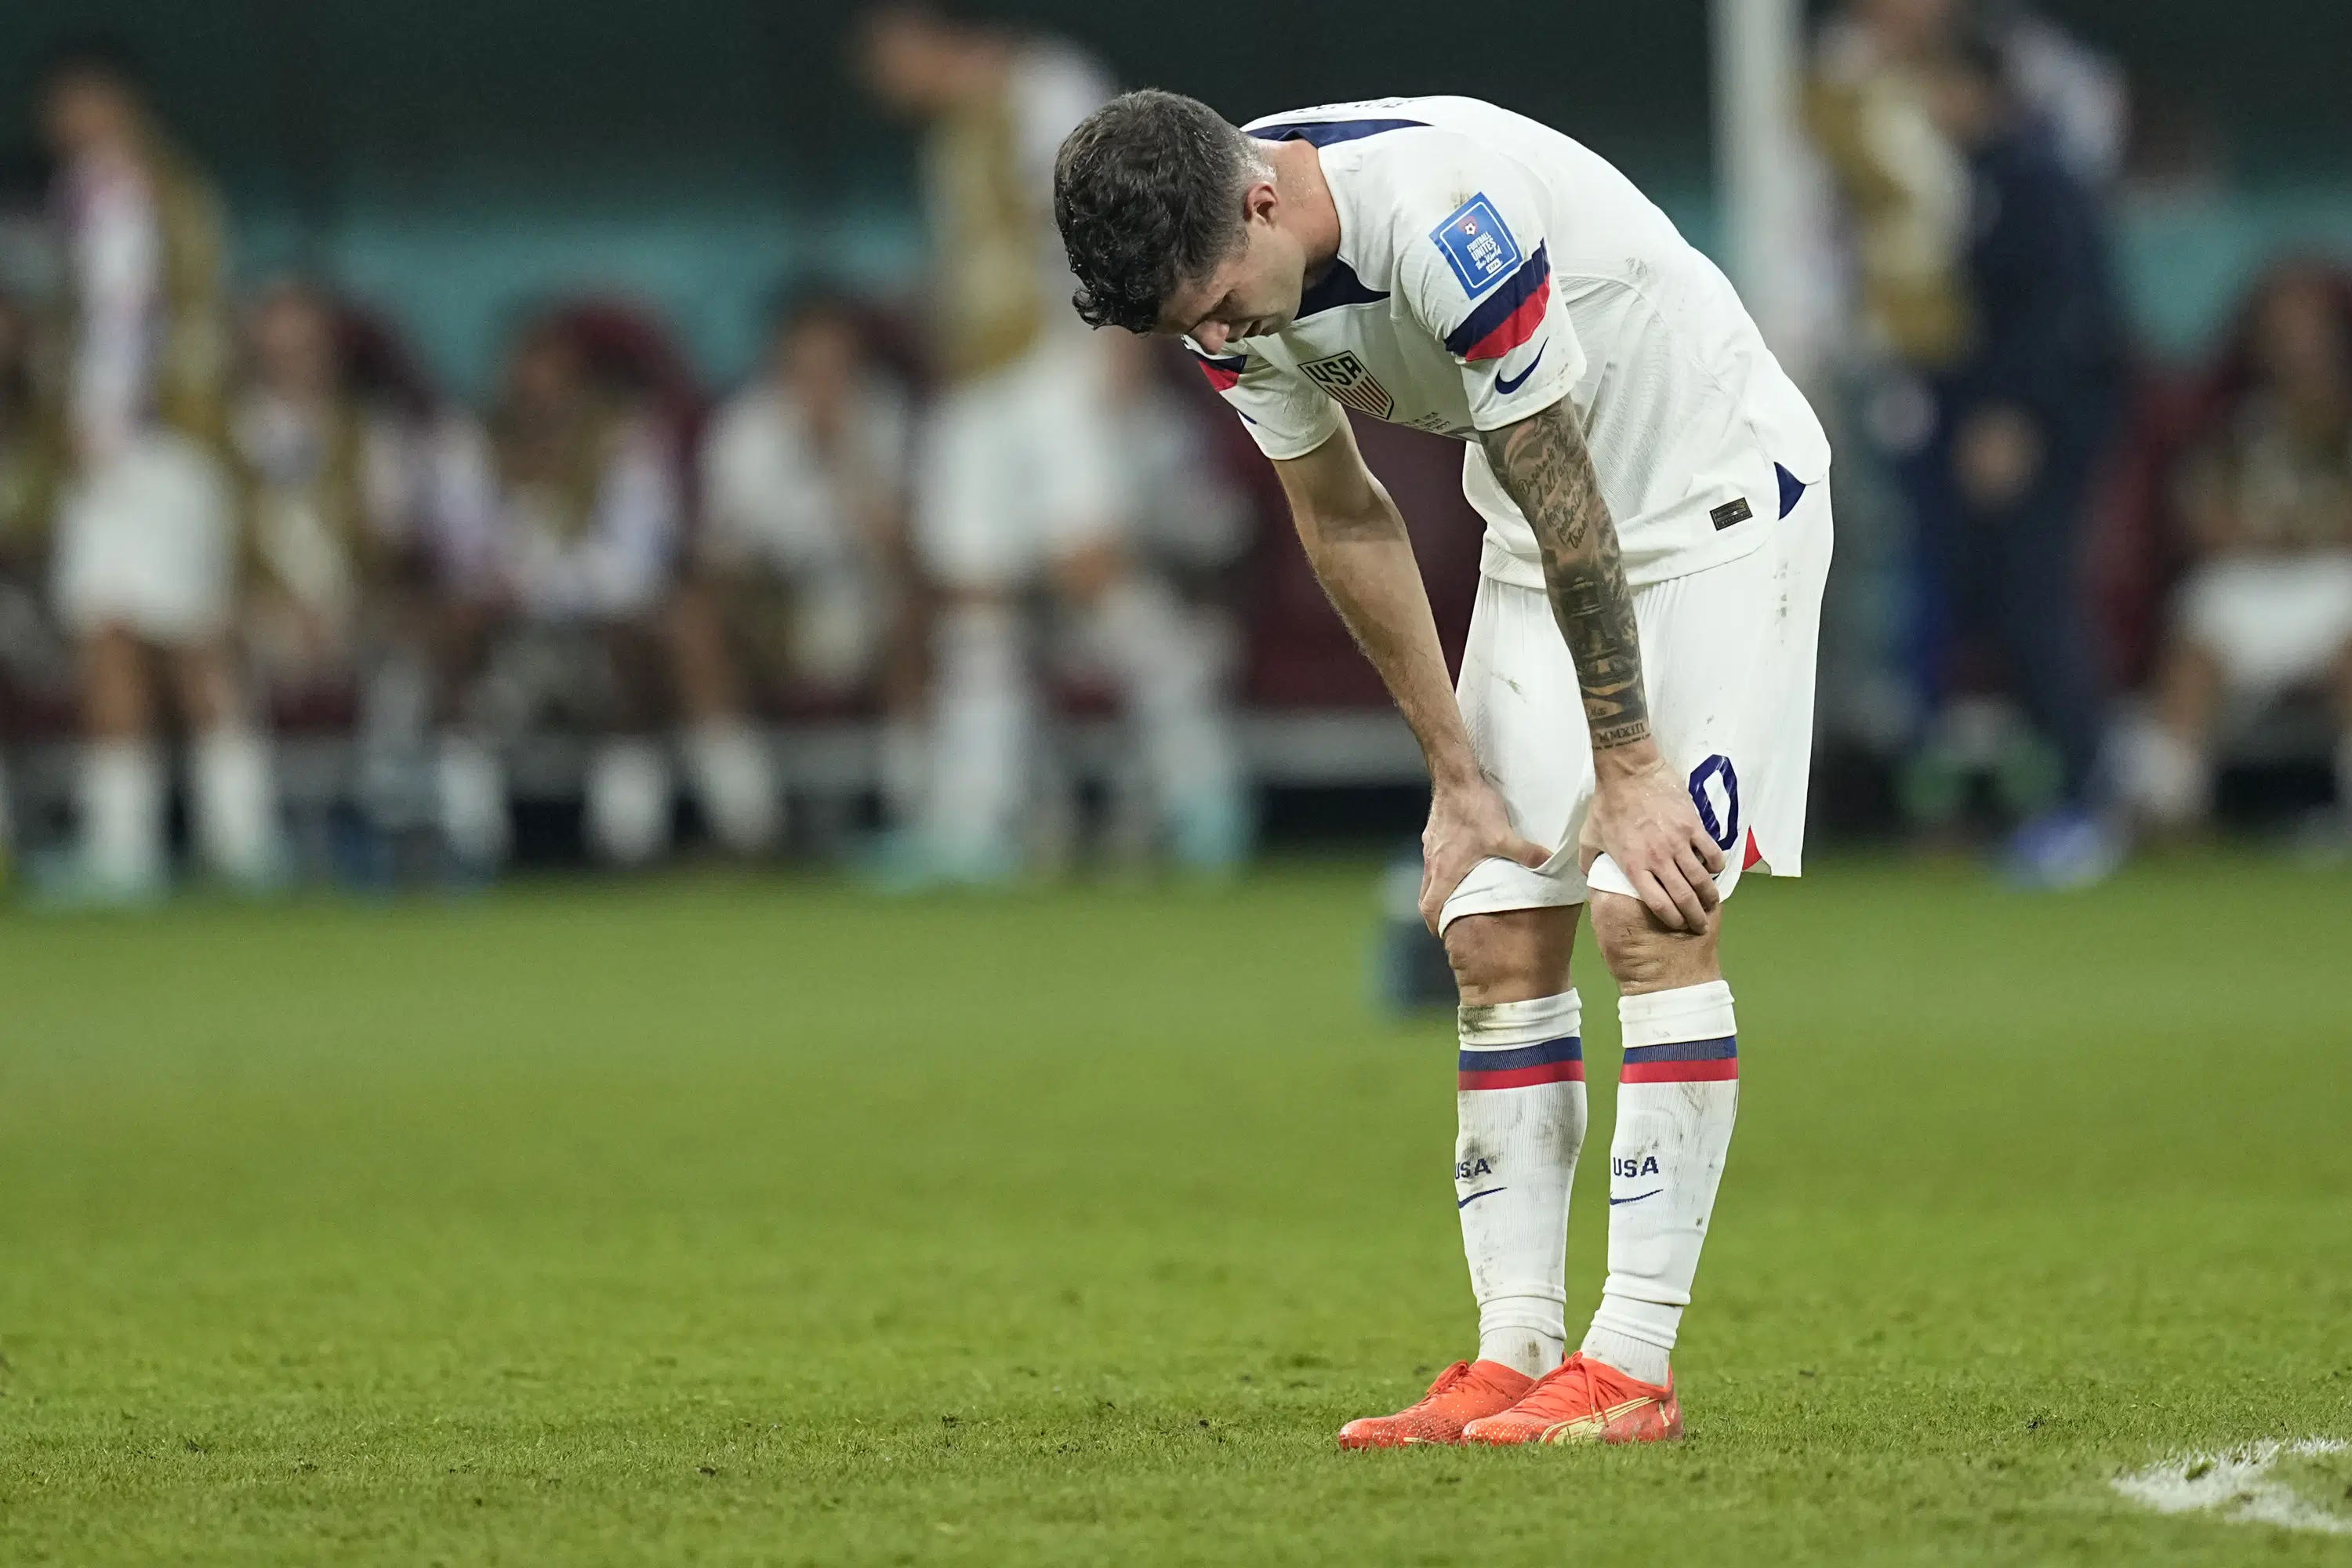 US knocked out of World Cup, loses to the Netherlands 3-1